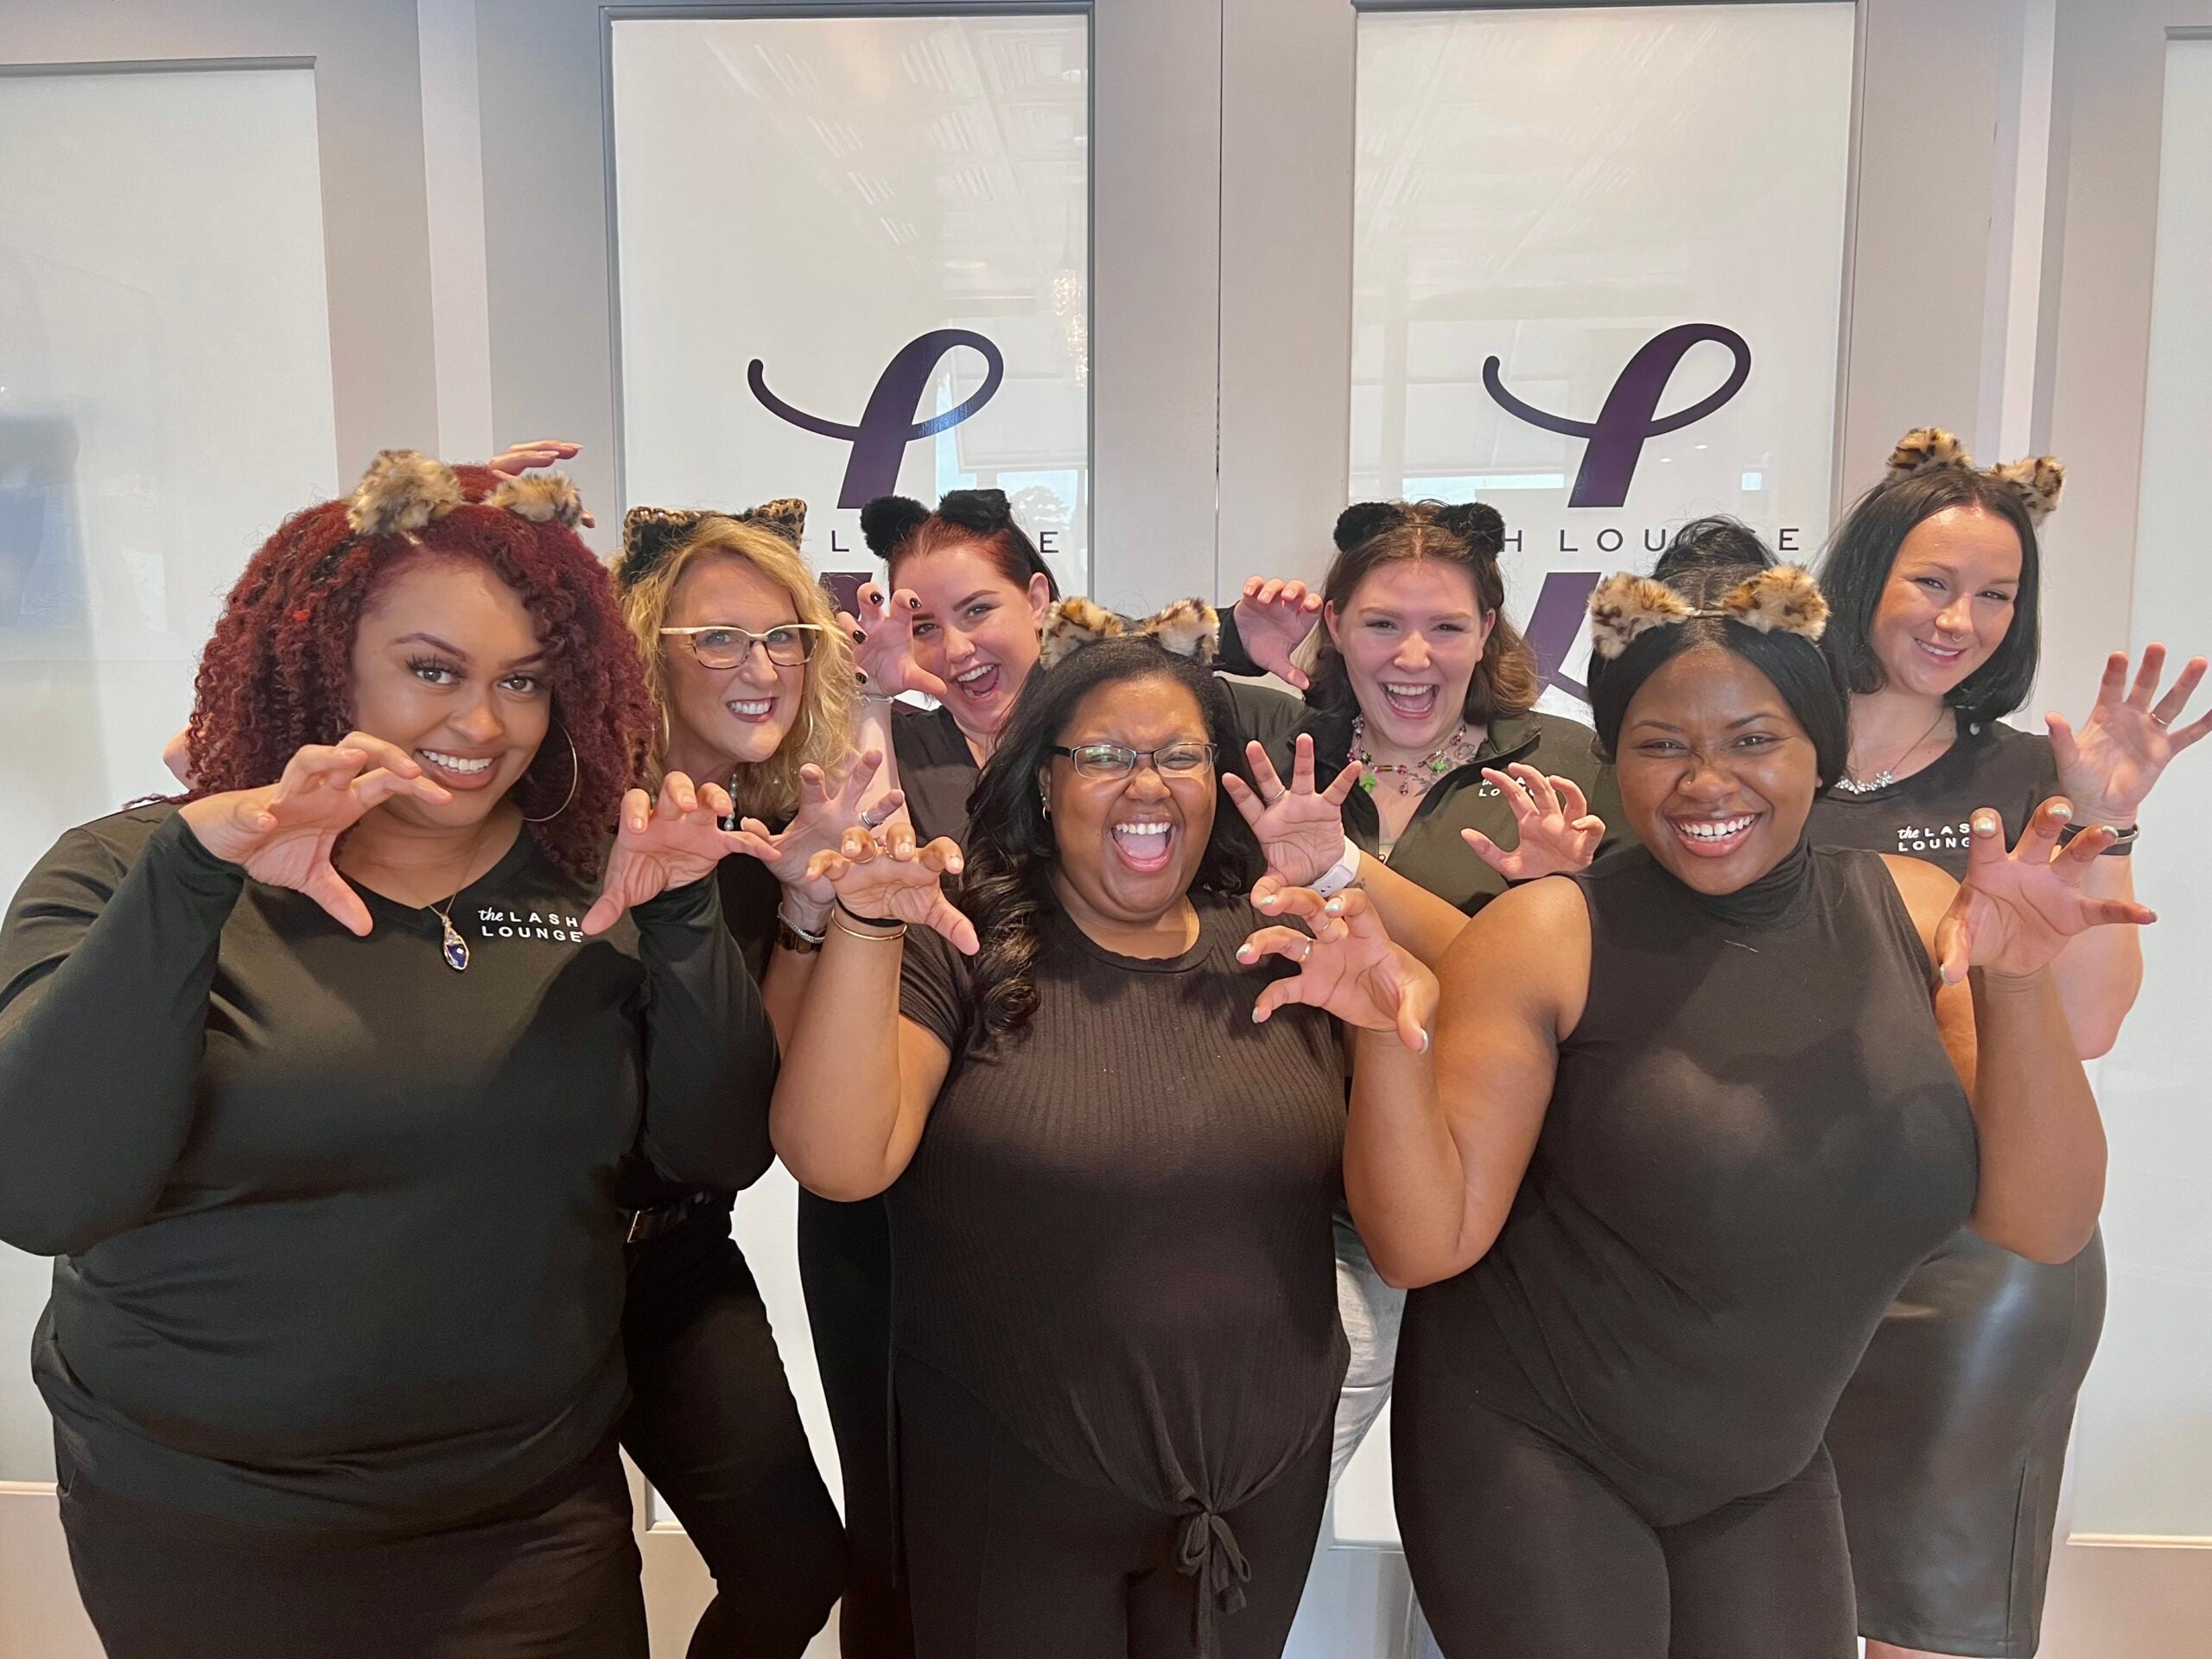 The Lash Lounge Savannah – Victory Station's staff posing together.